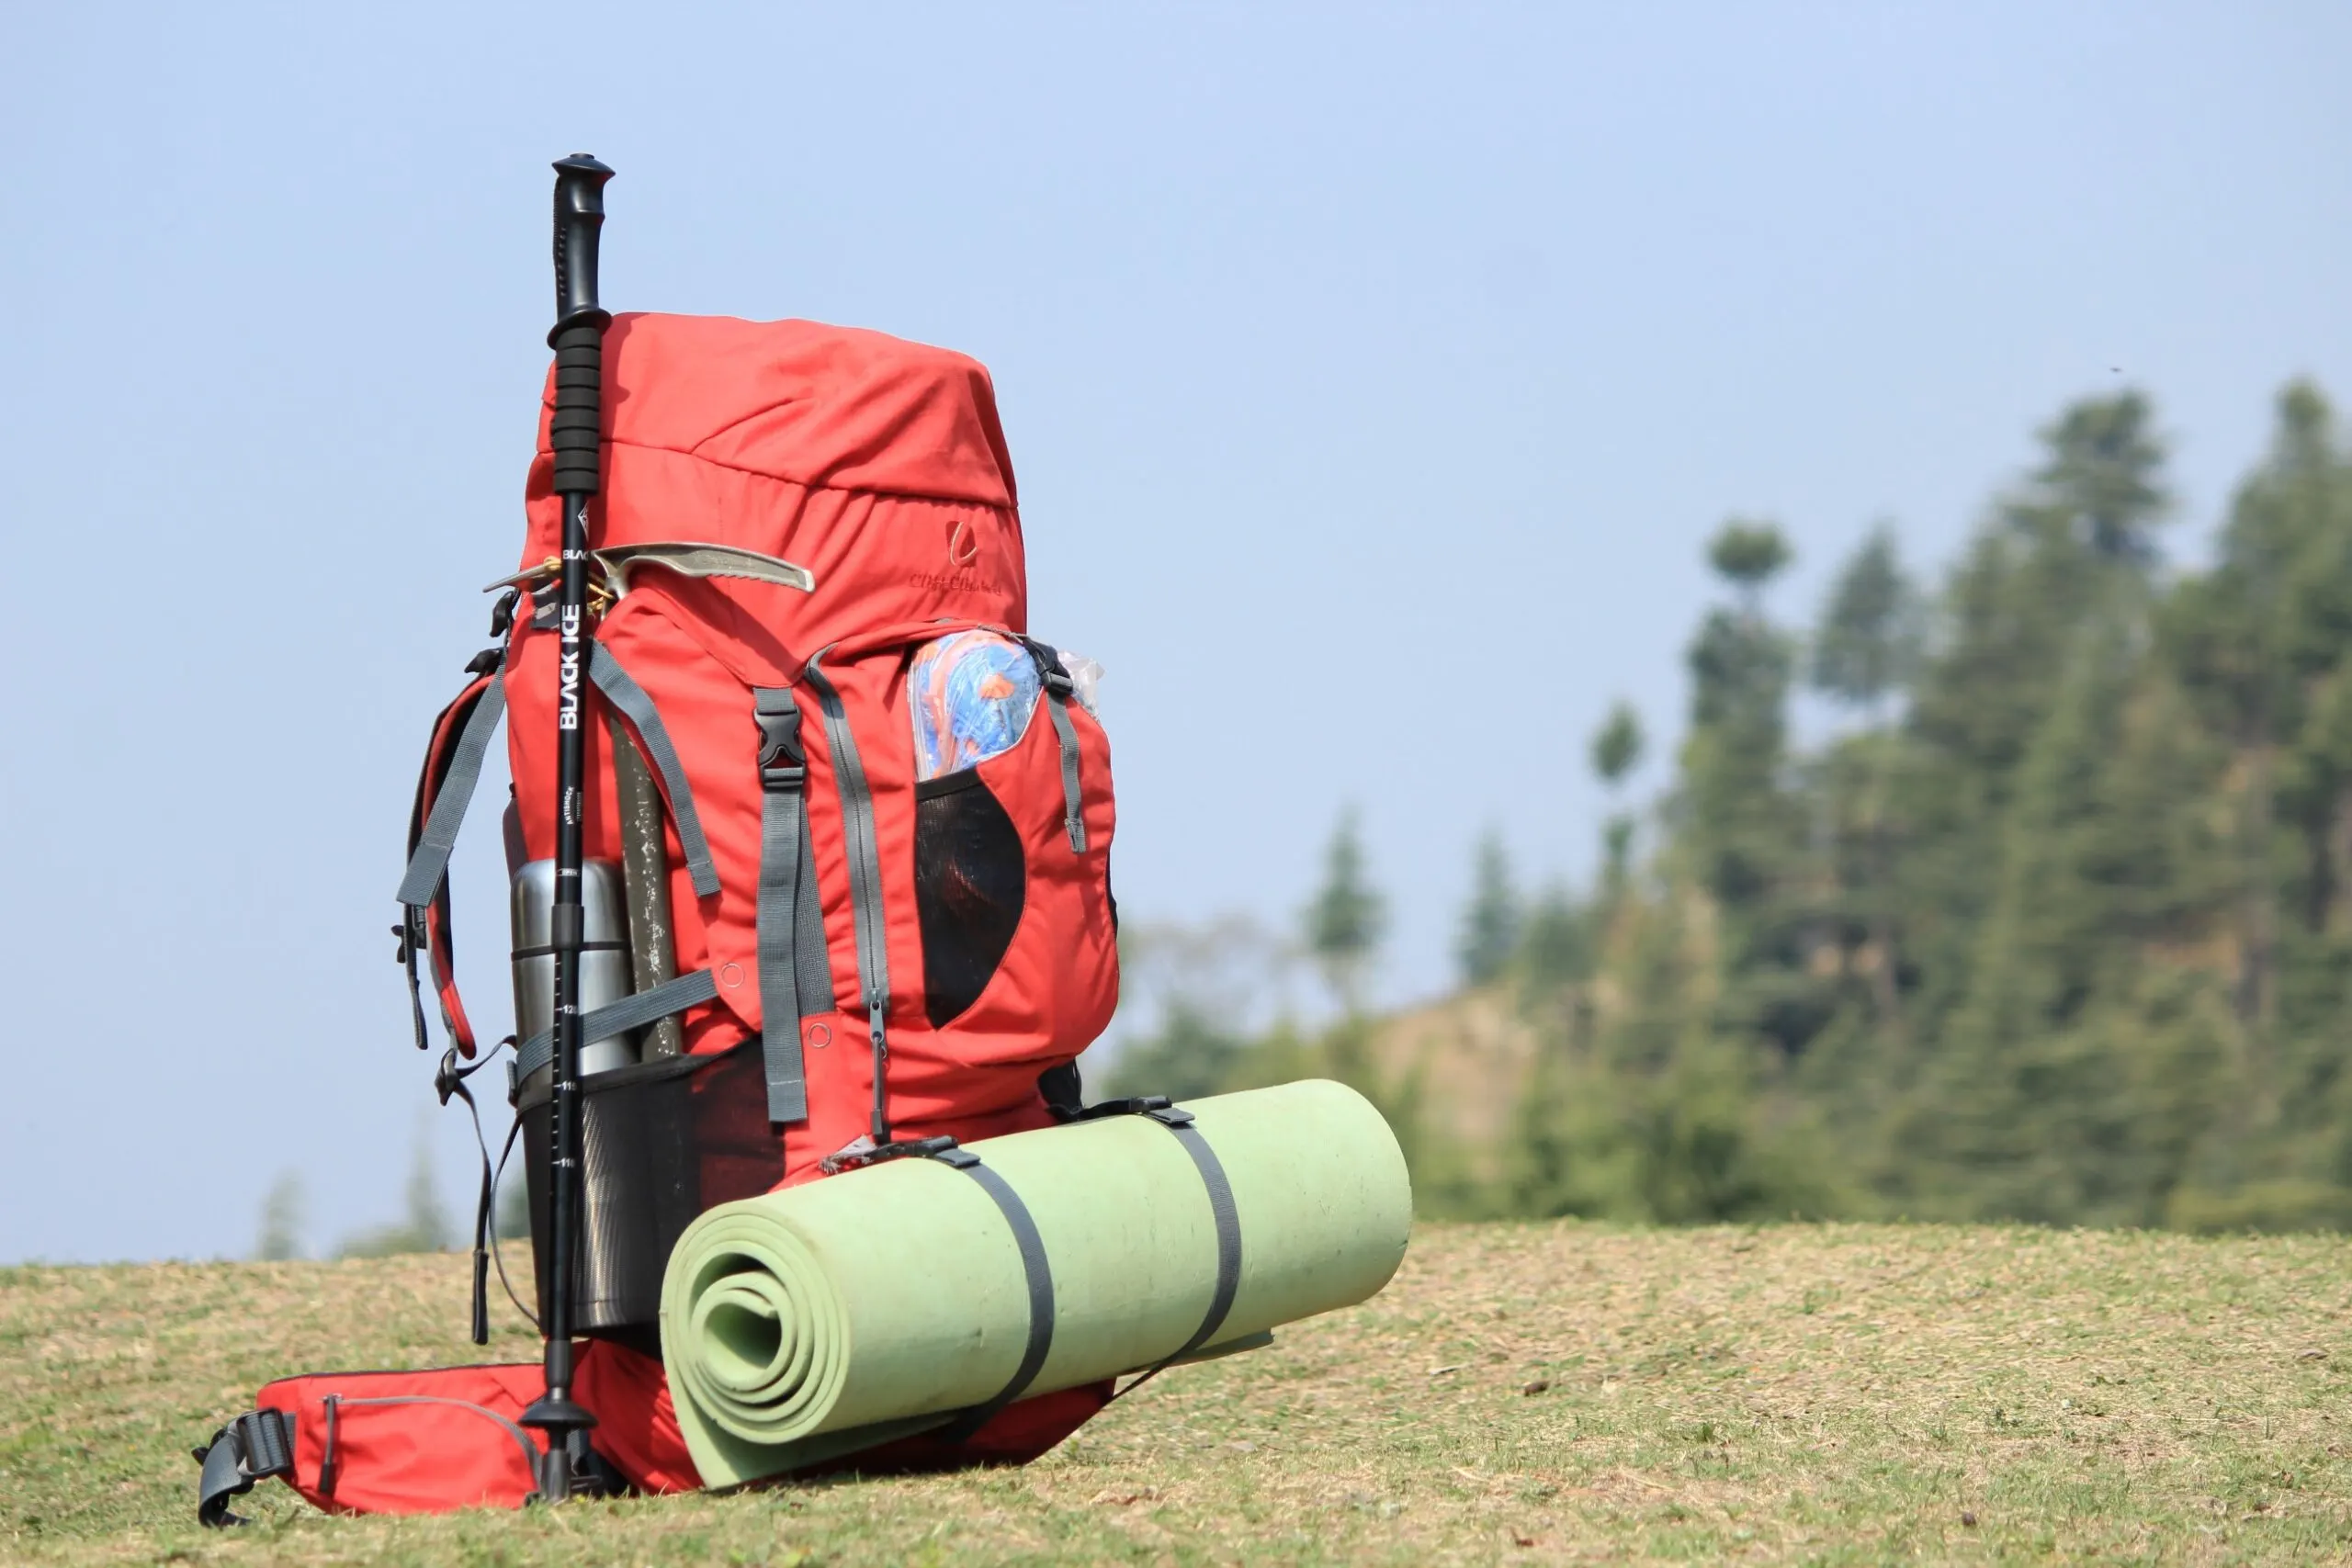 Red Hiking Backpack on Green Grass